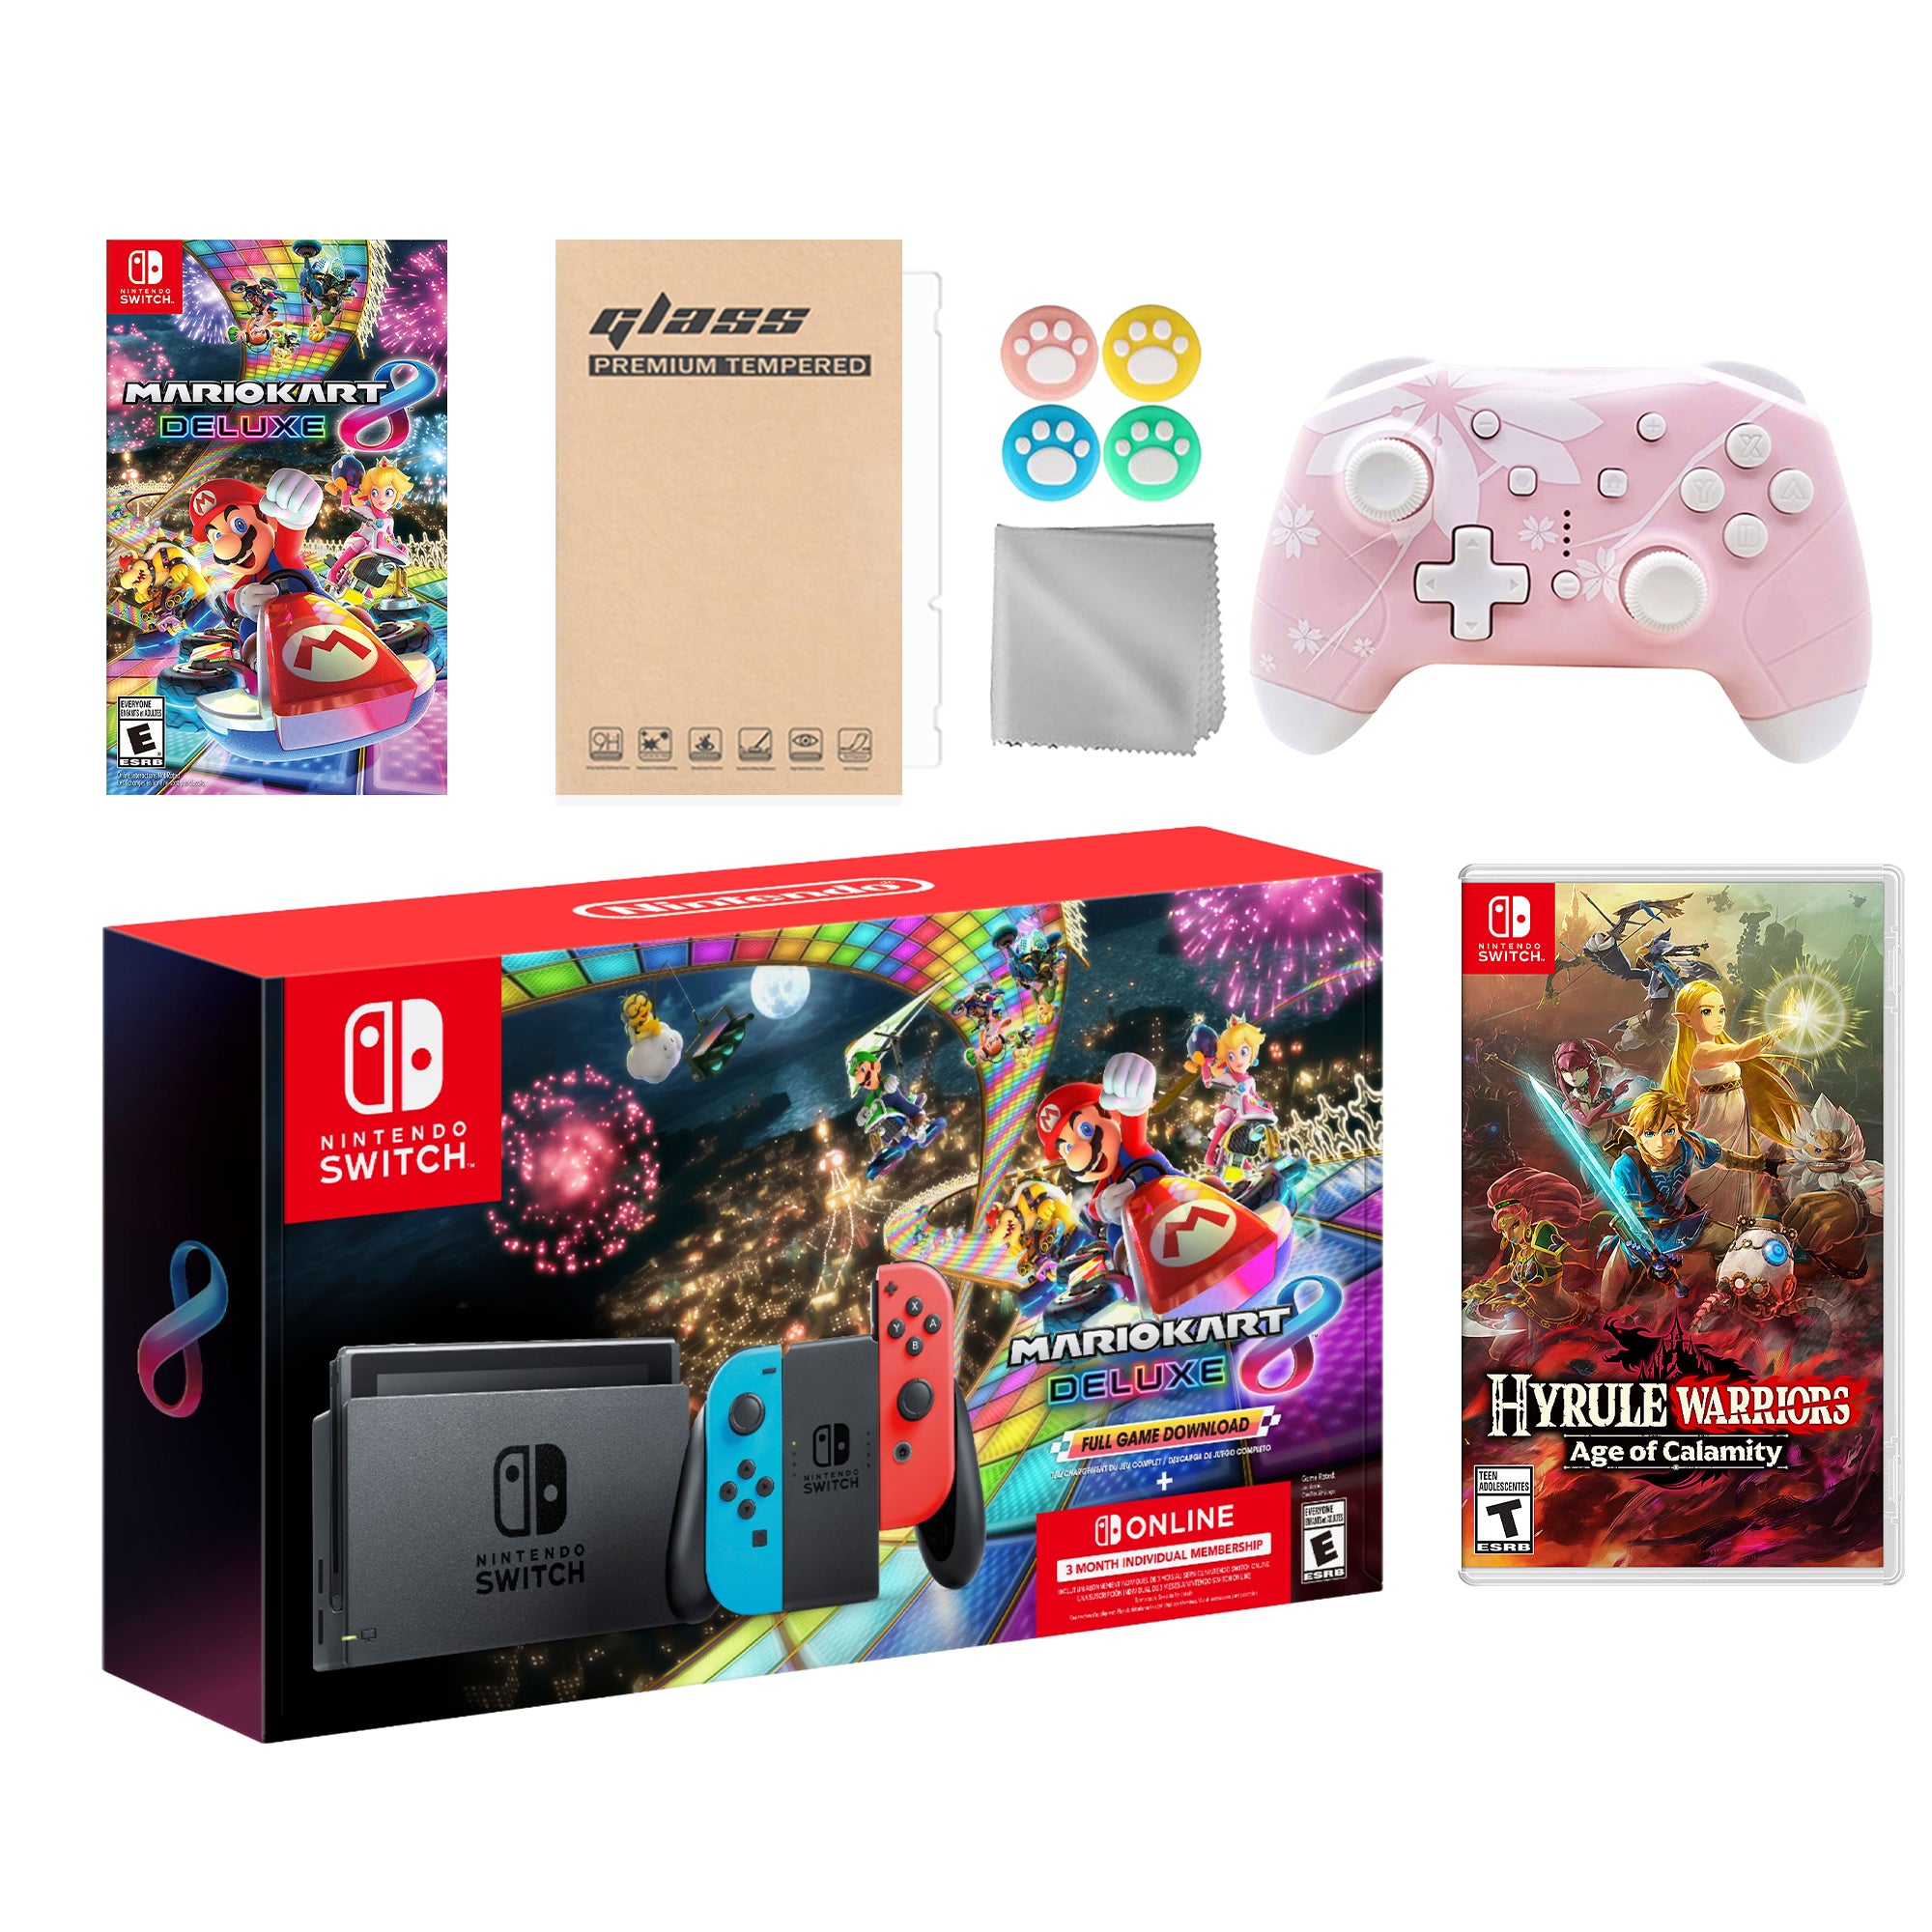 Nintendo Switch Mario Kart 8 Deluxe Bundle: Red Blue Console, Mario Kart 8 & Membership, Hyrule Warriors: Age of Calamity, Mytrix Wireless Pro Controller Pink Cherry Blossom and Accessories